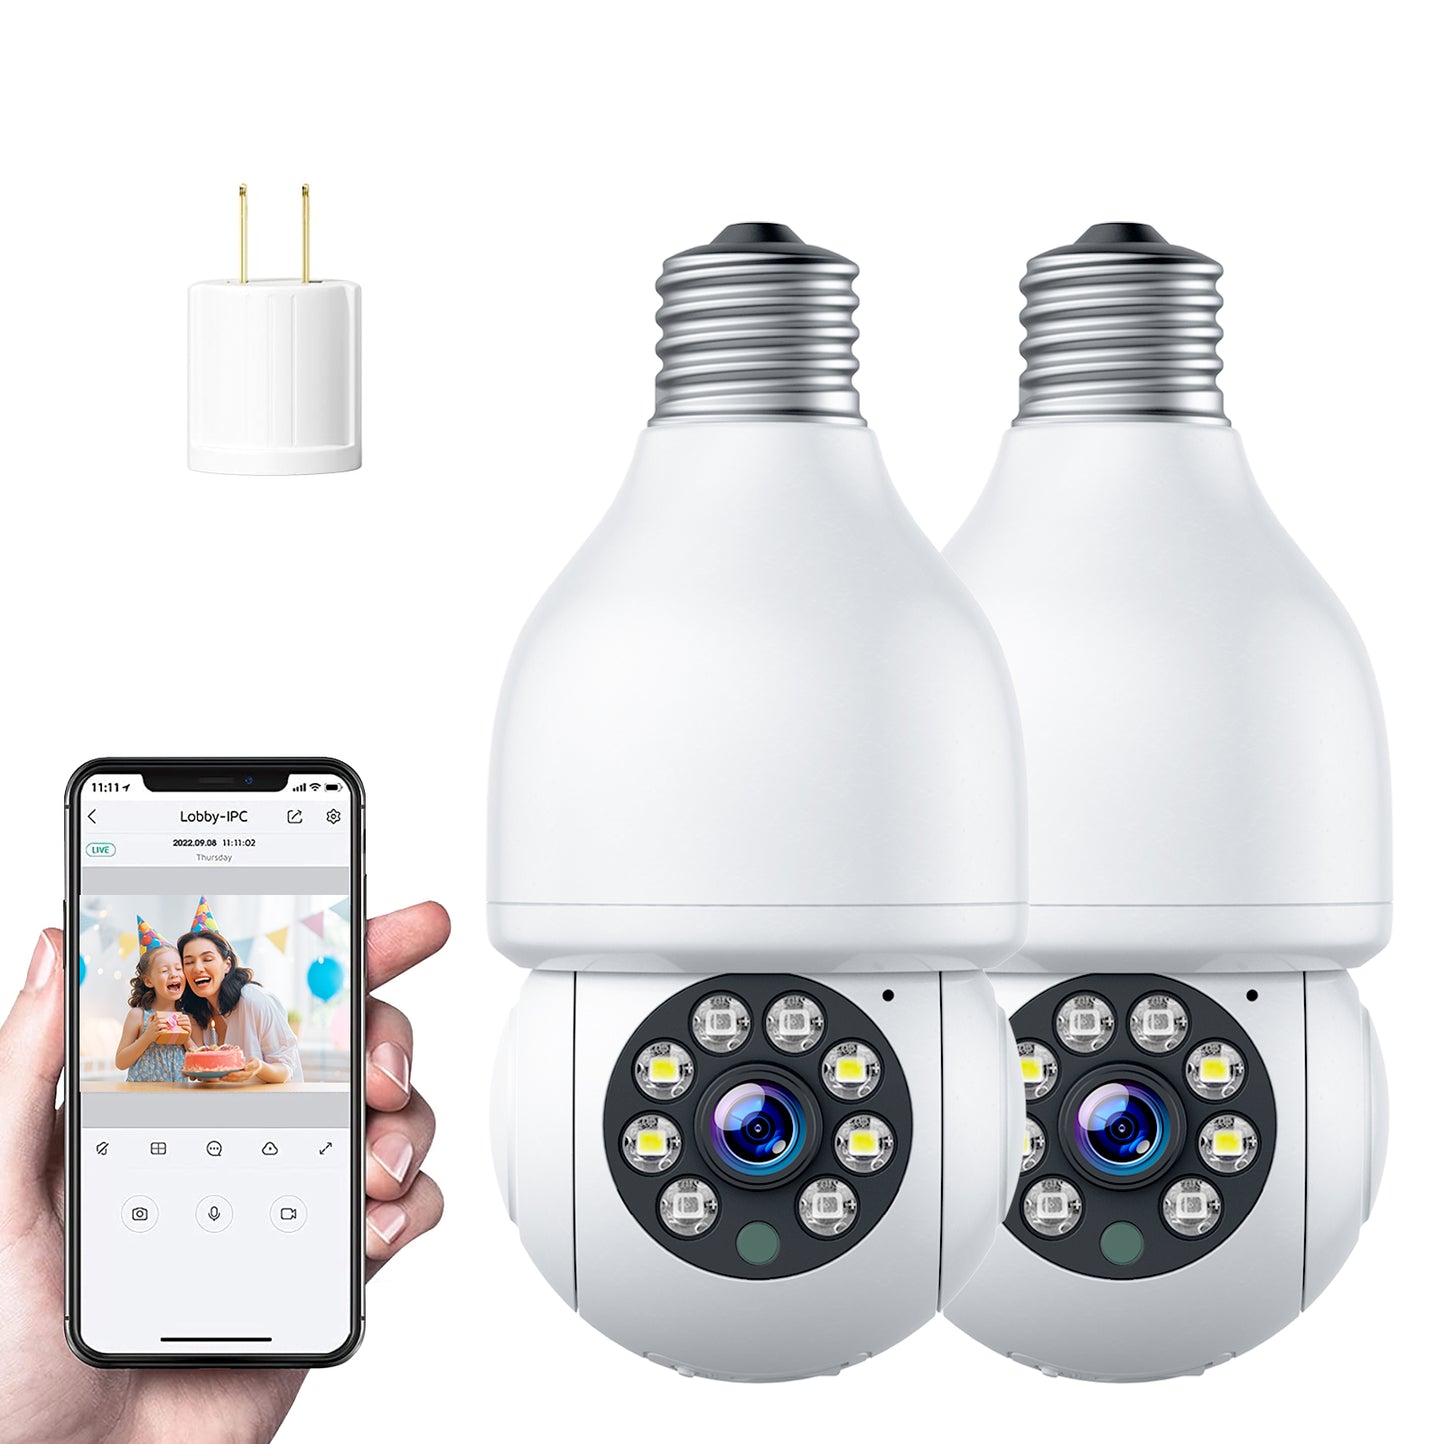 TOGUARD E27 Dome Light Bulb Camera 2.4G WiFi 1080P Security Camera Wireless Outdoor, Color Night Vision 2-Way Audio 360° IP Camera with Remote Access Motion Detection (2PCS)